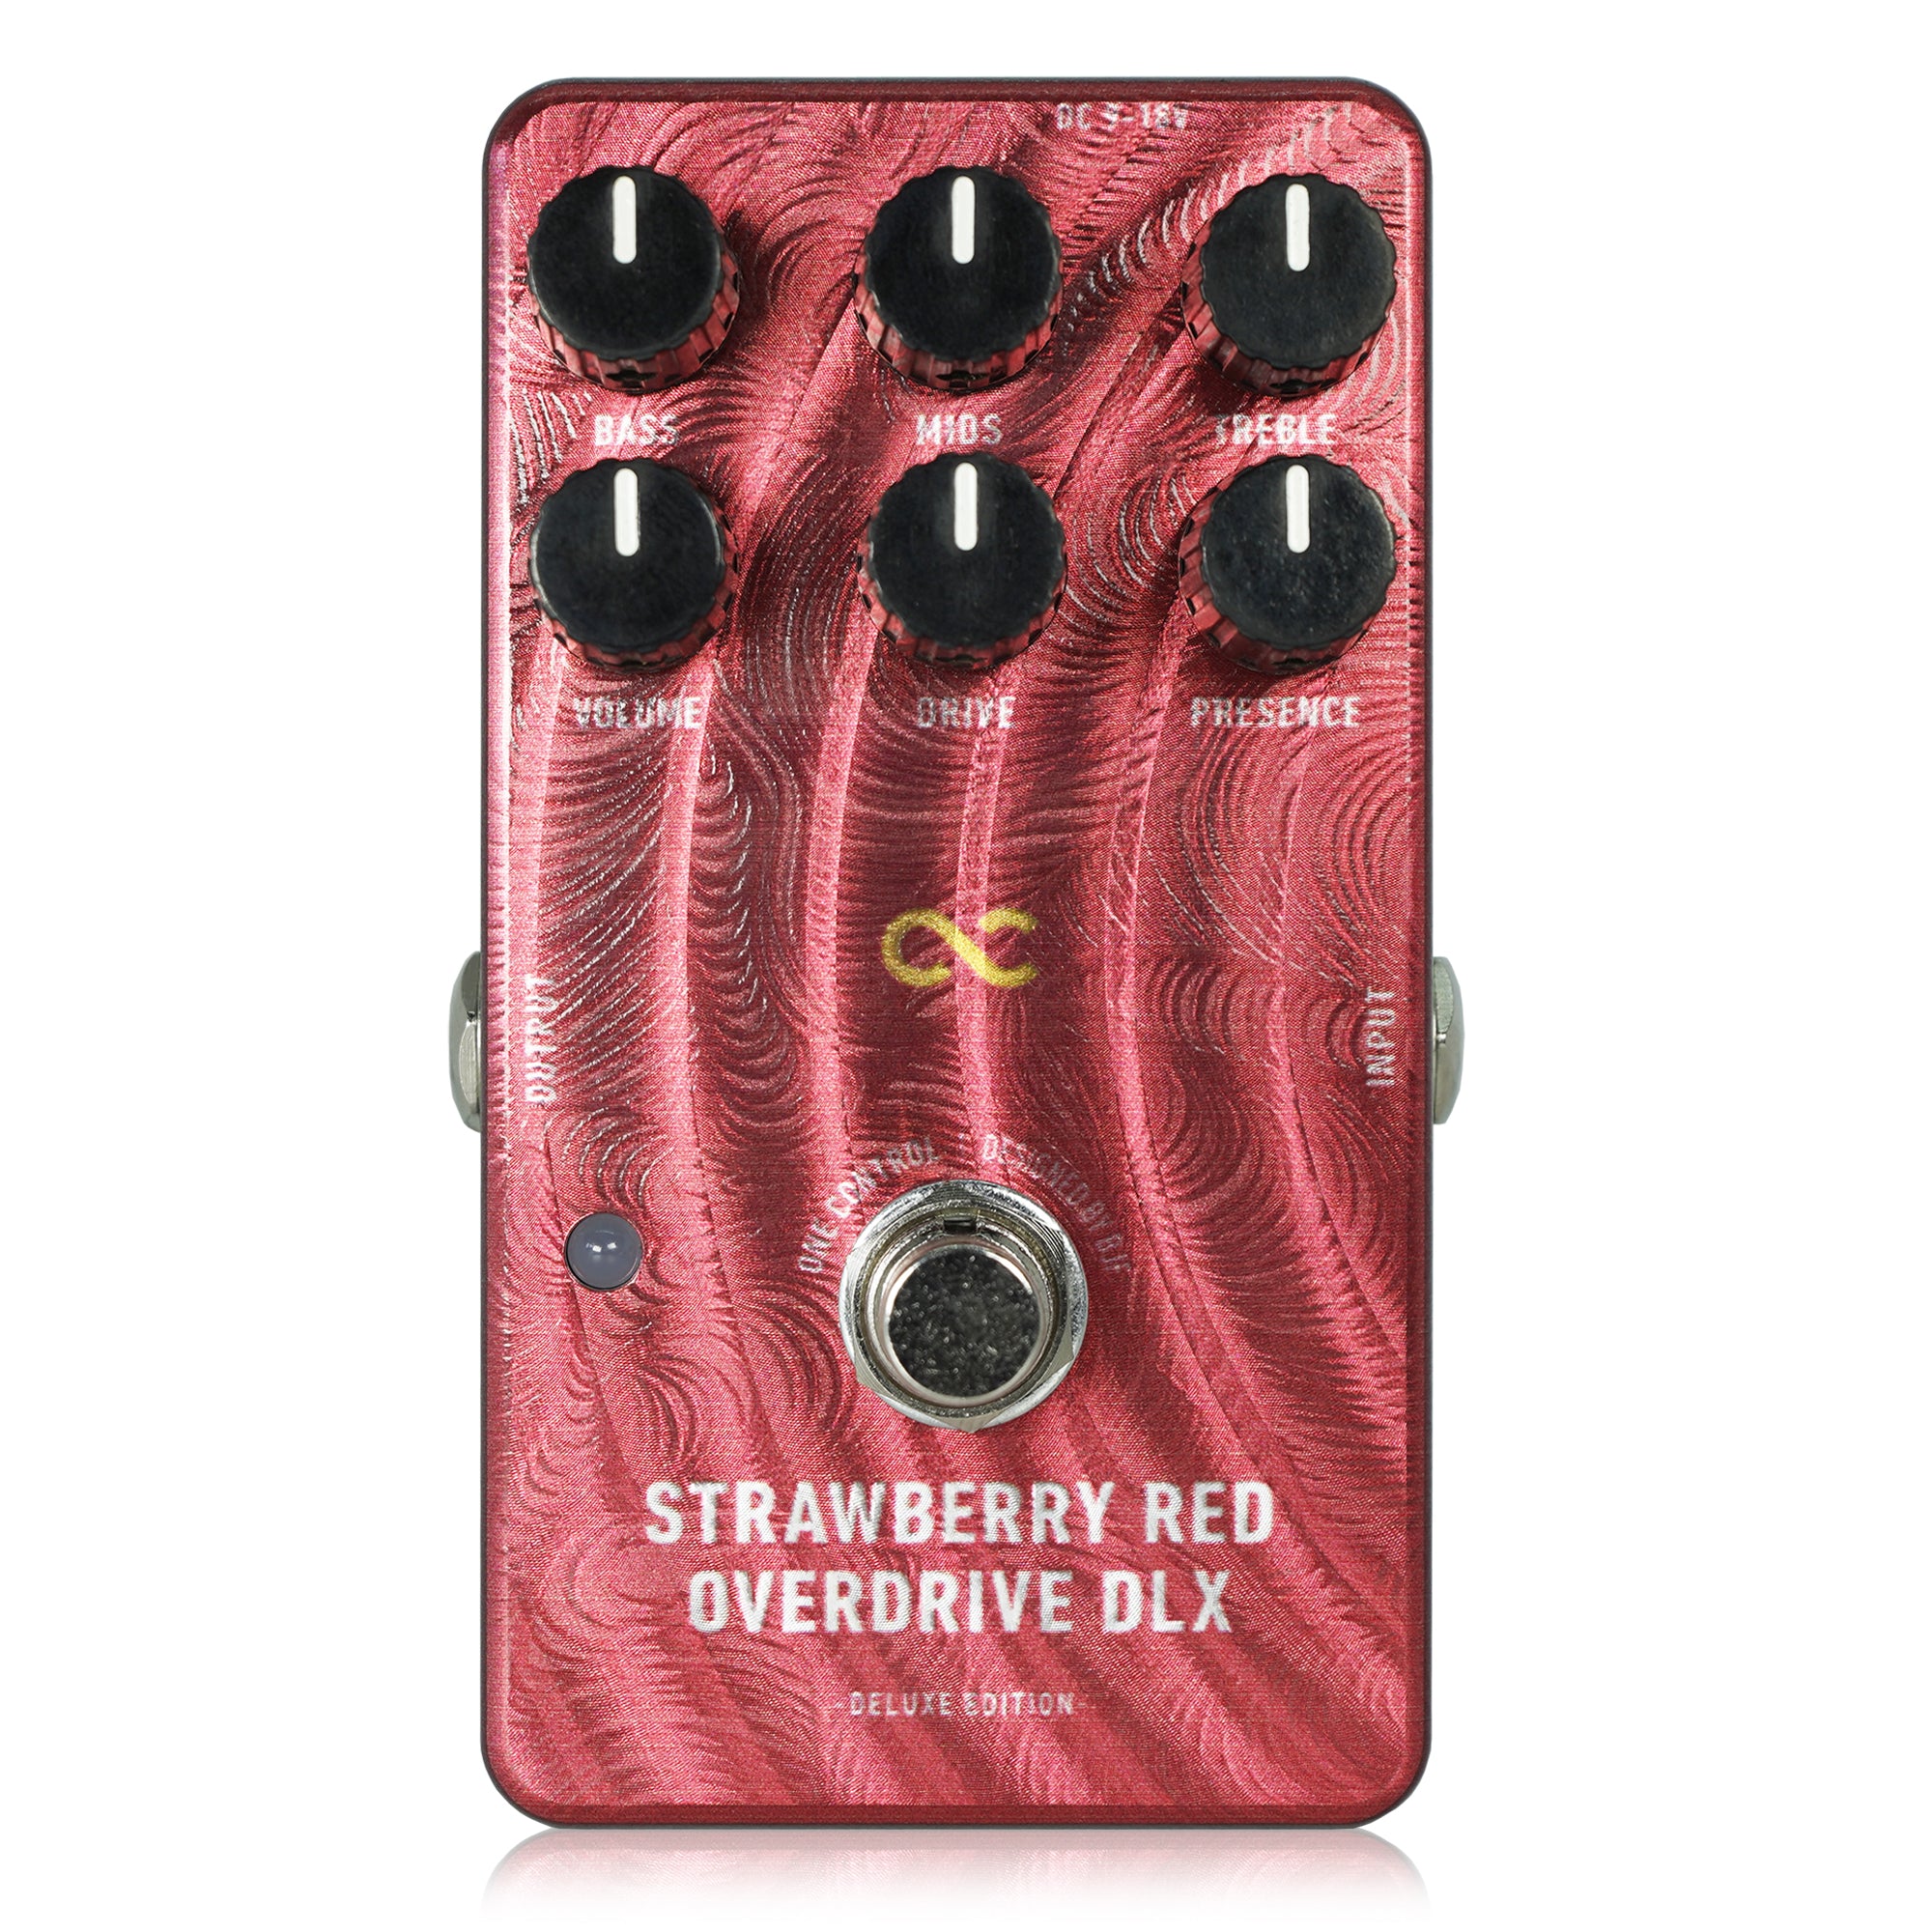 ONECONTROL  STRAWBERRY RED OVER DRIVE